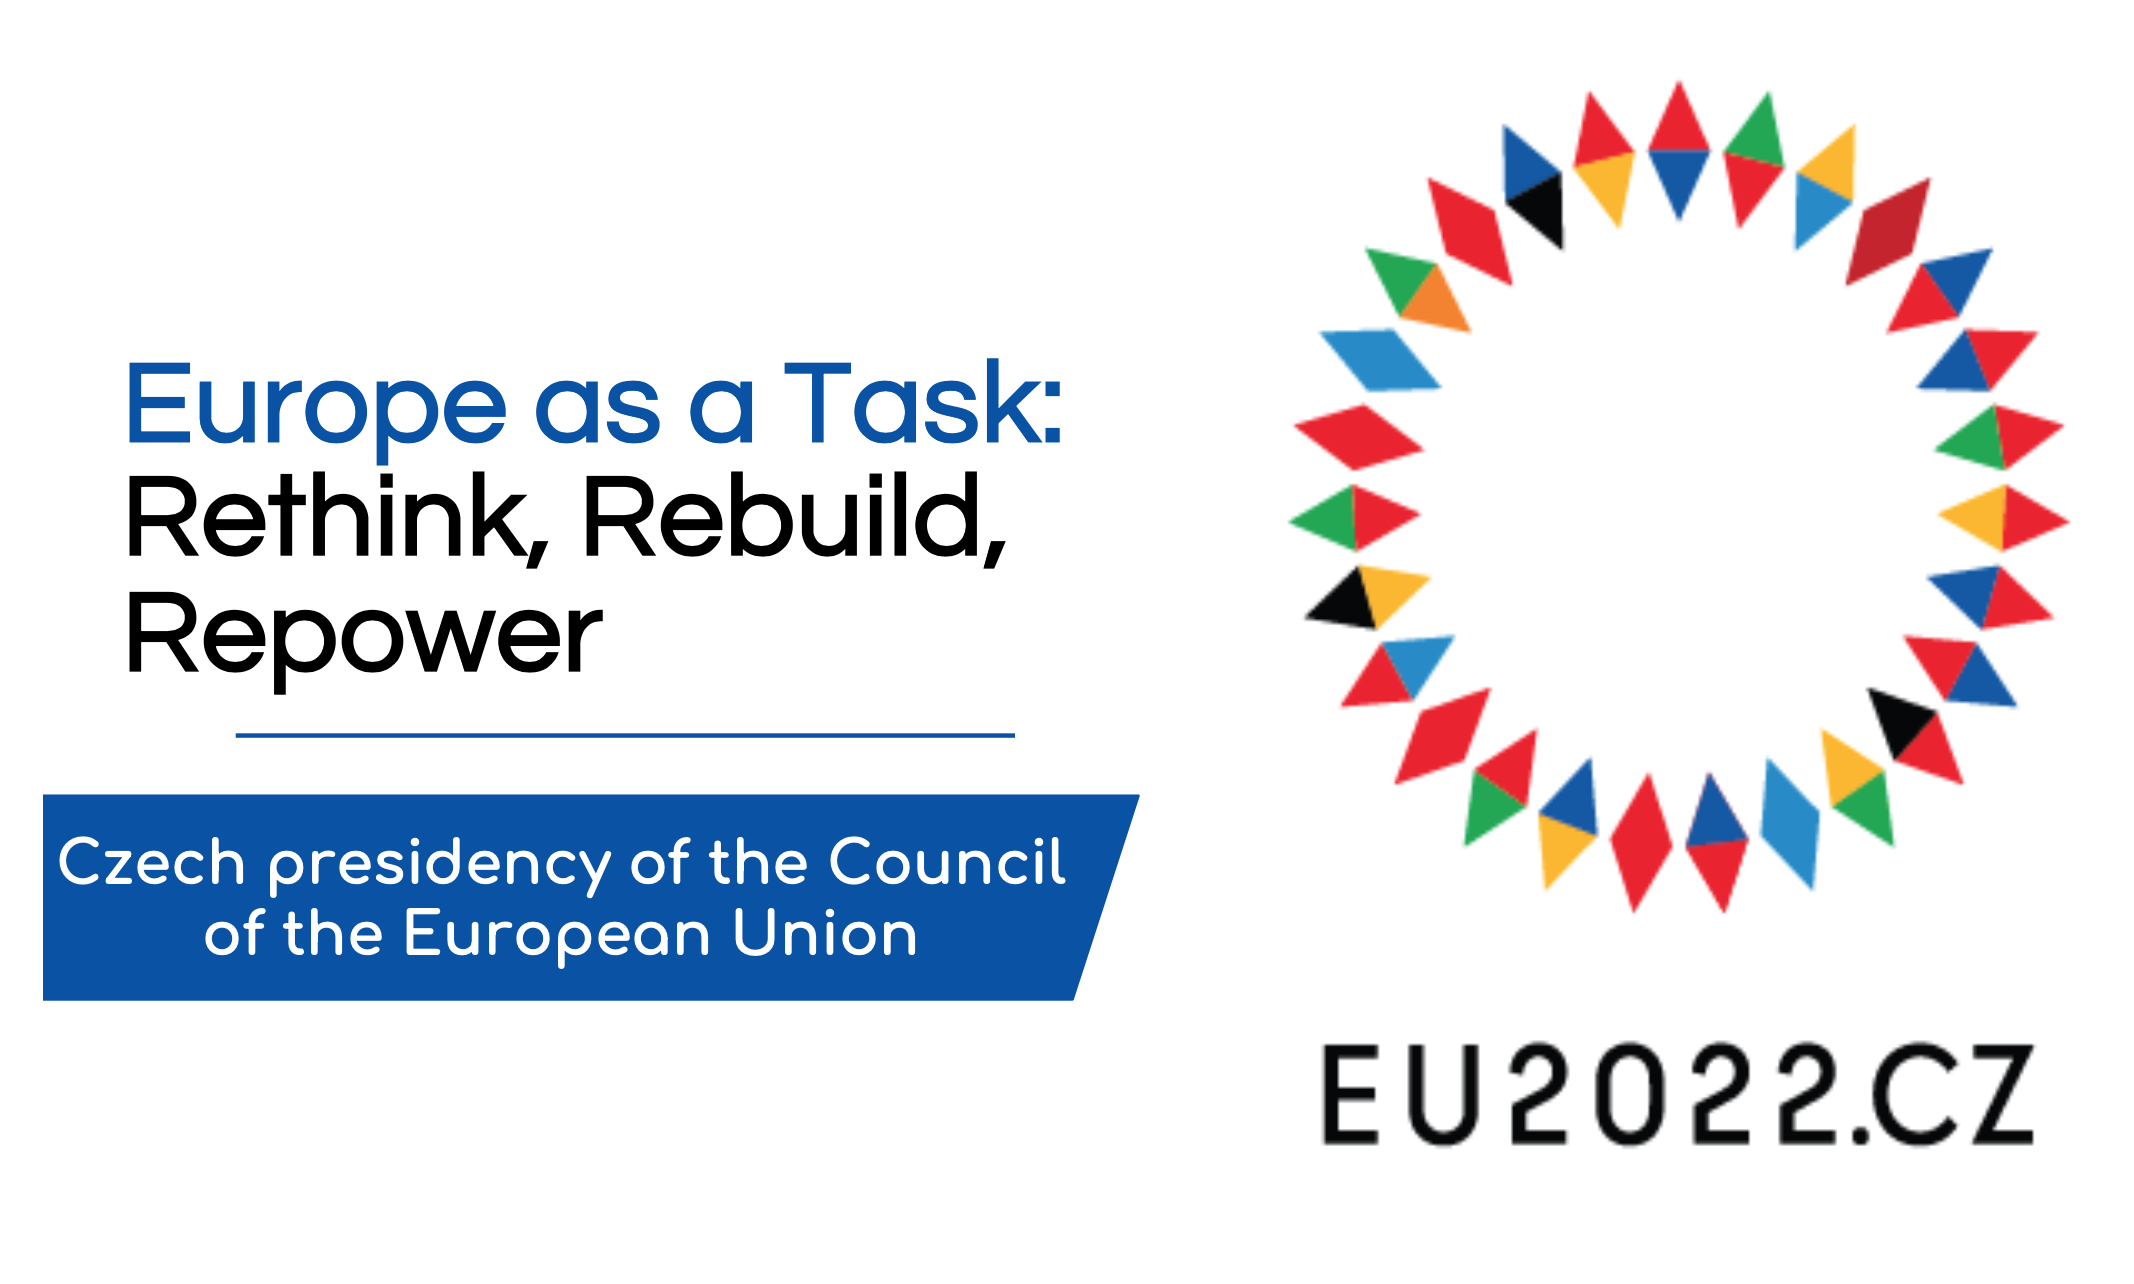 Czech presidency of the Council of the European Union